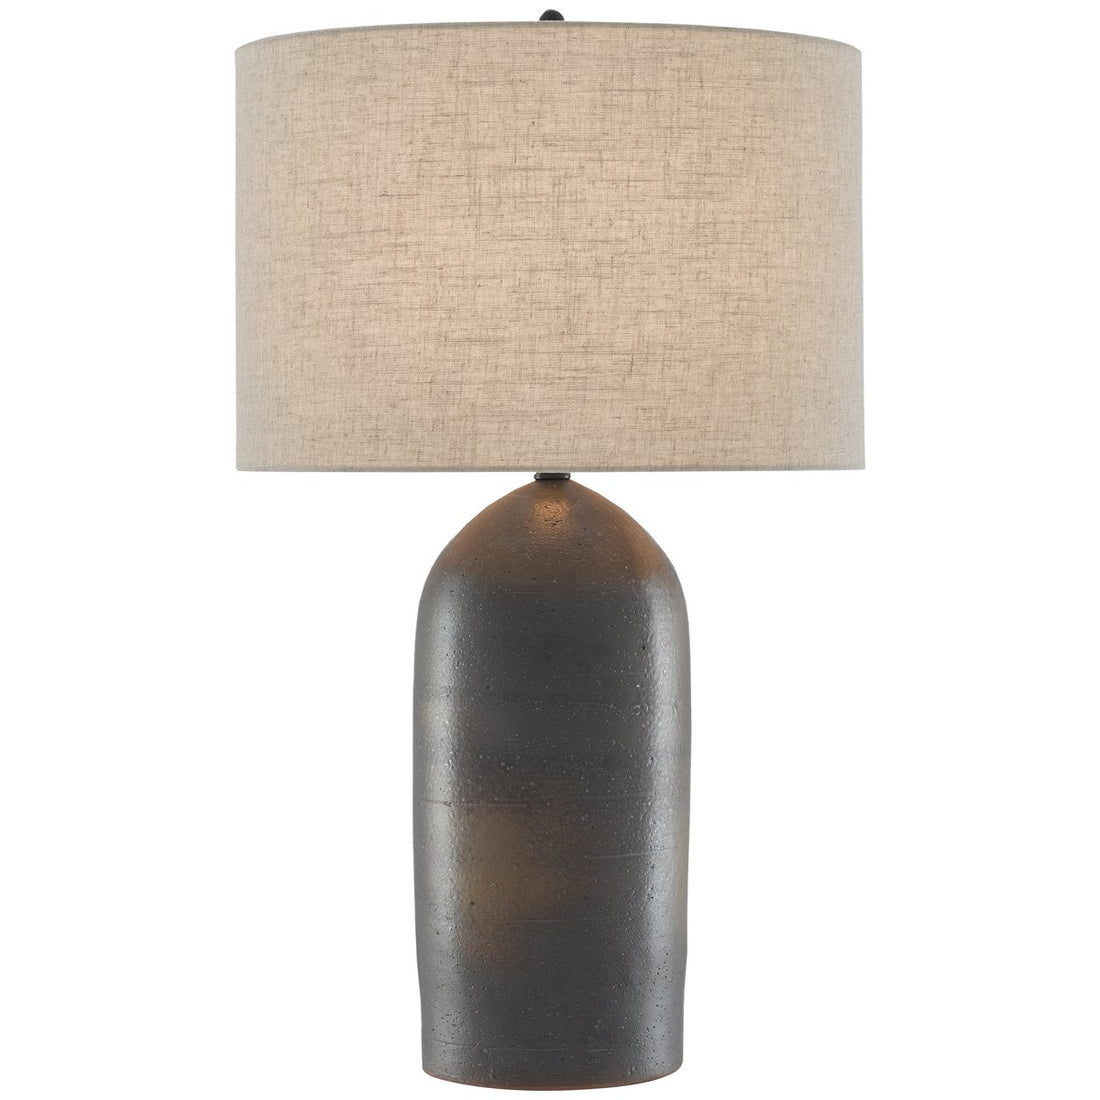 Currey and Company Munby Table Lamp